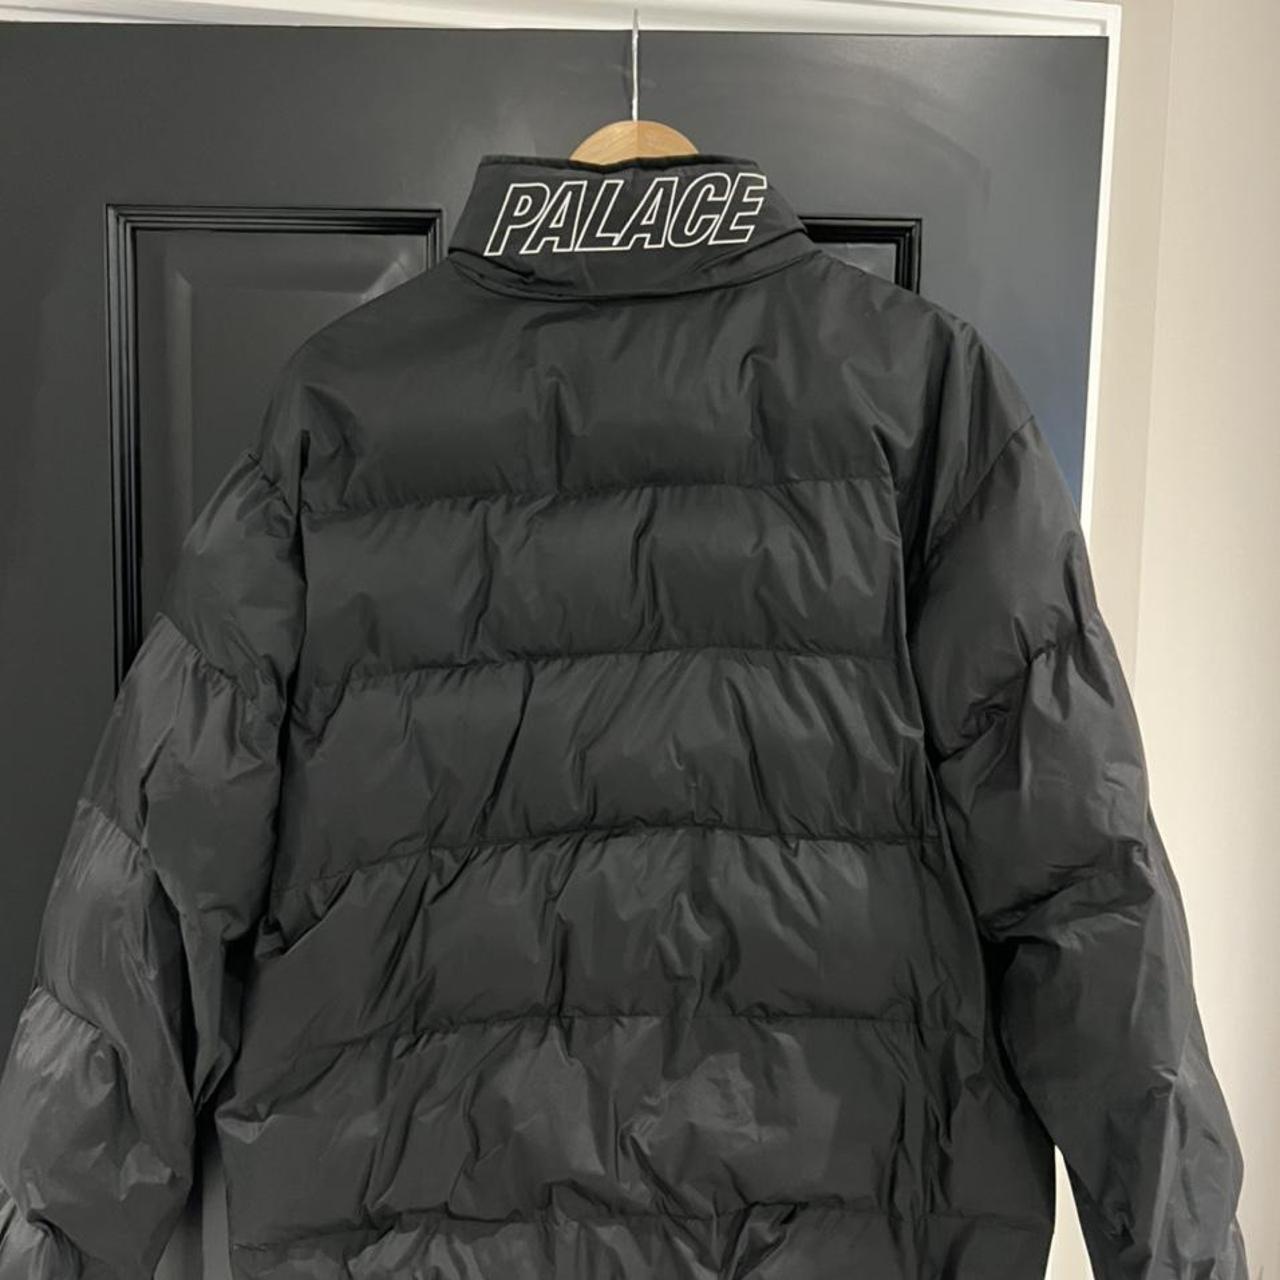 Palace puffer jacket from AW15. Very rare piece to... - Depop